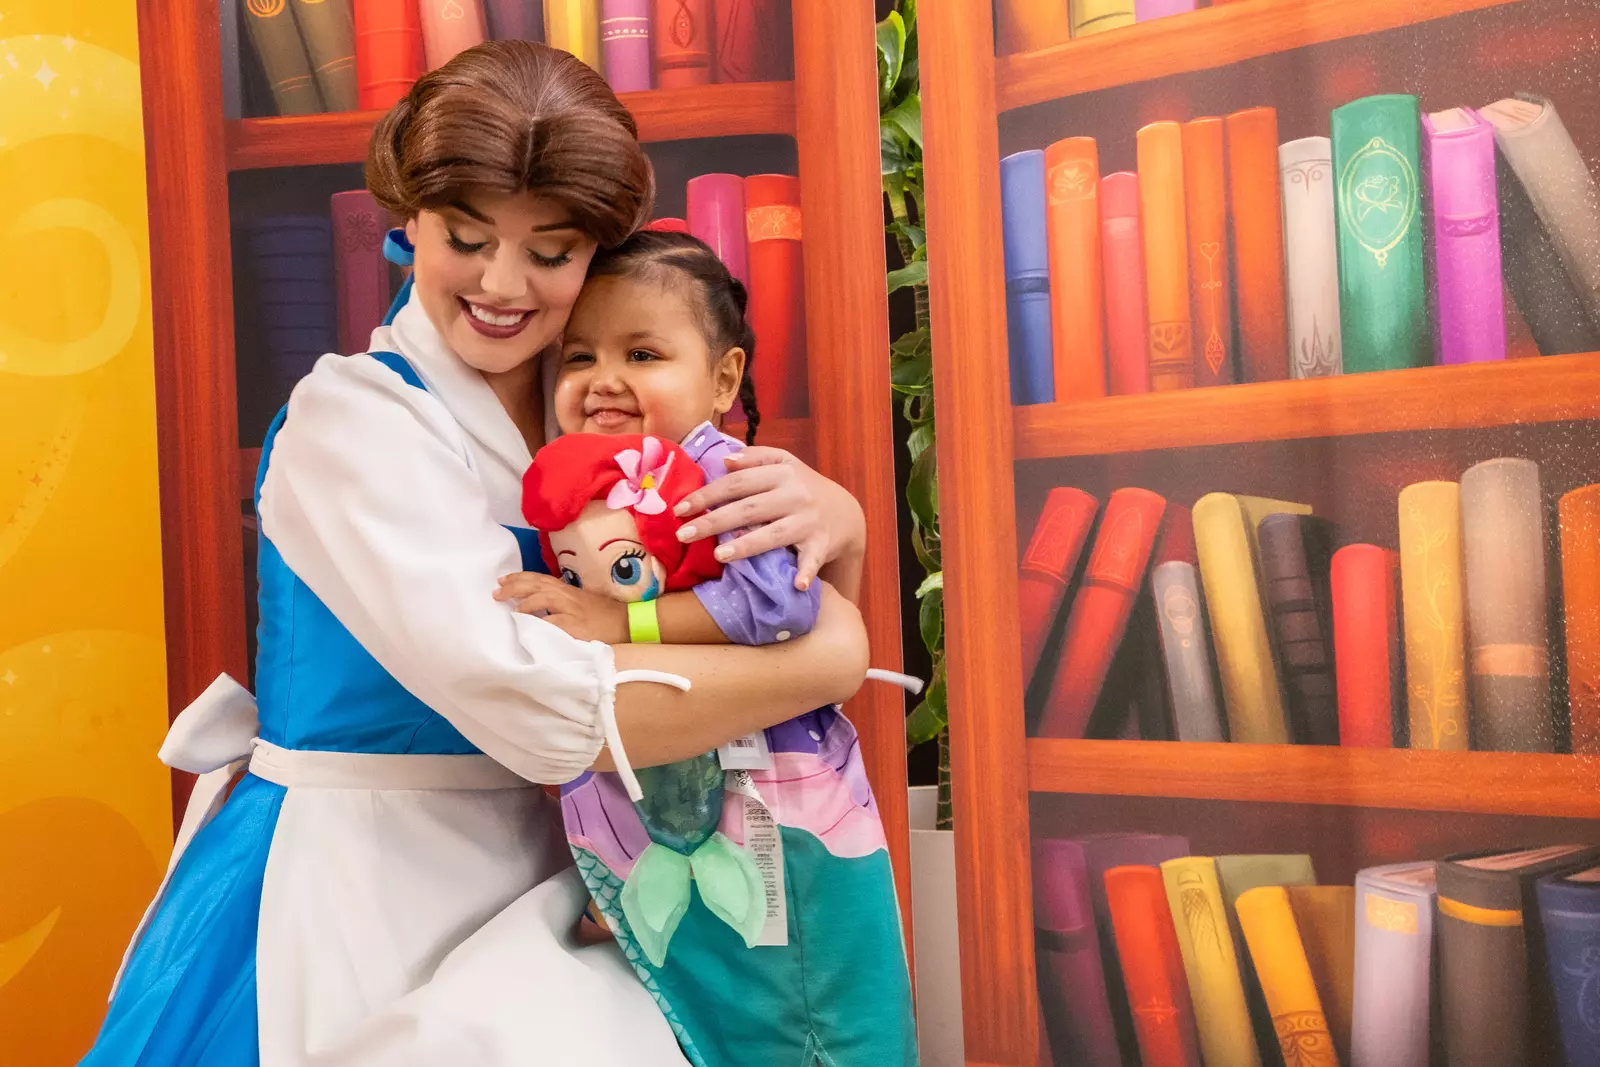 Disney Princess Belle hugs a young patient at AdventHealth for Children.